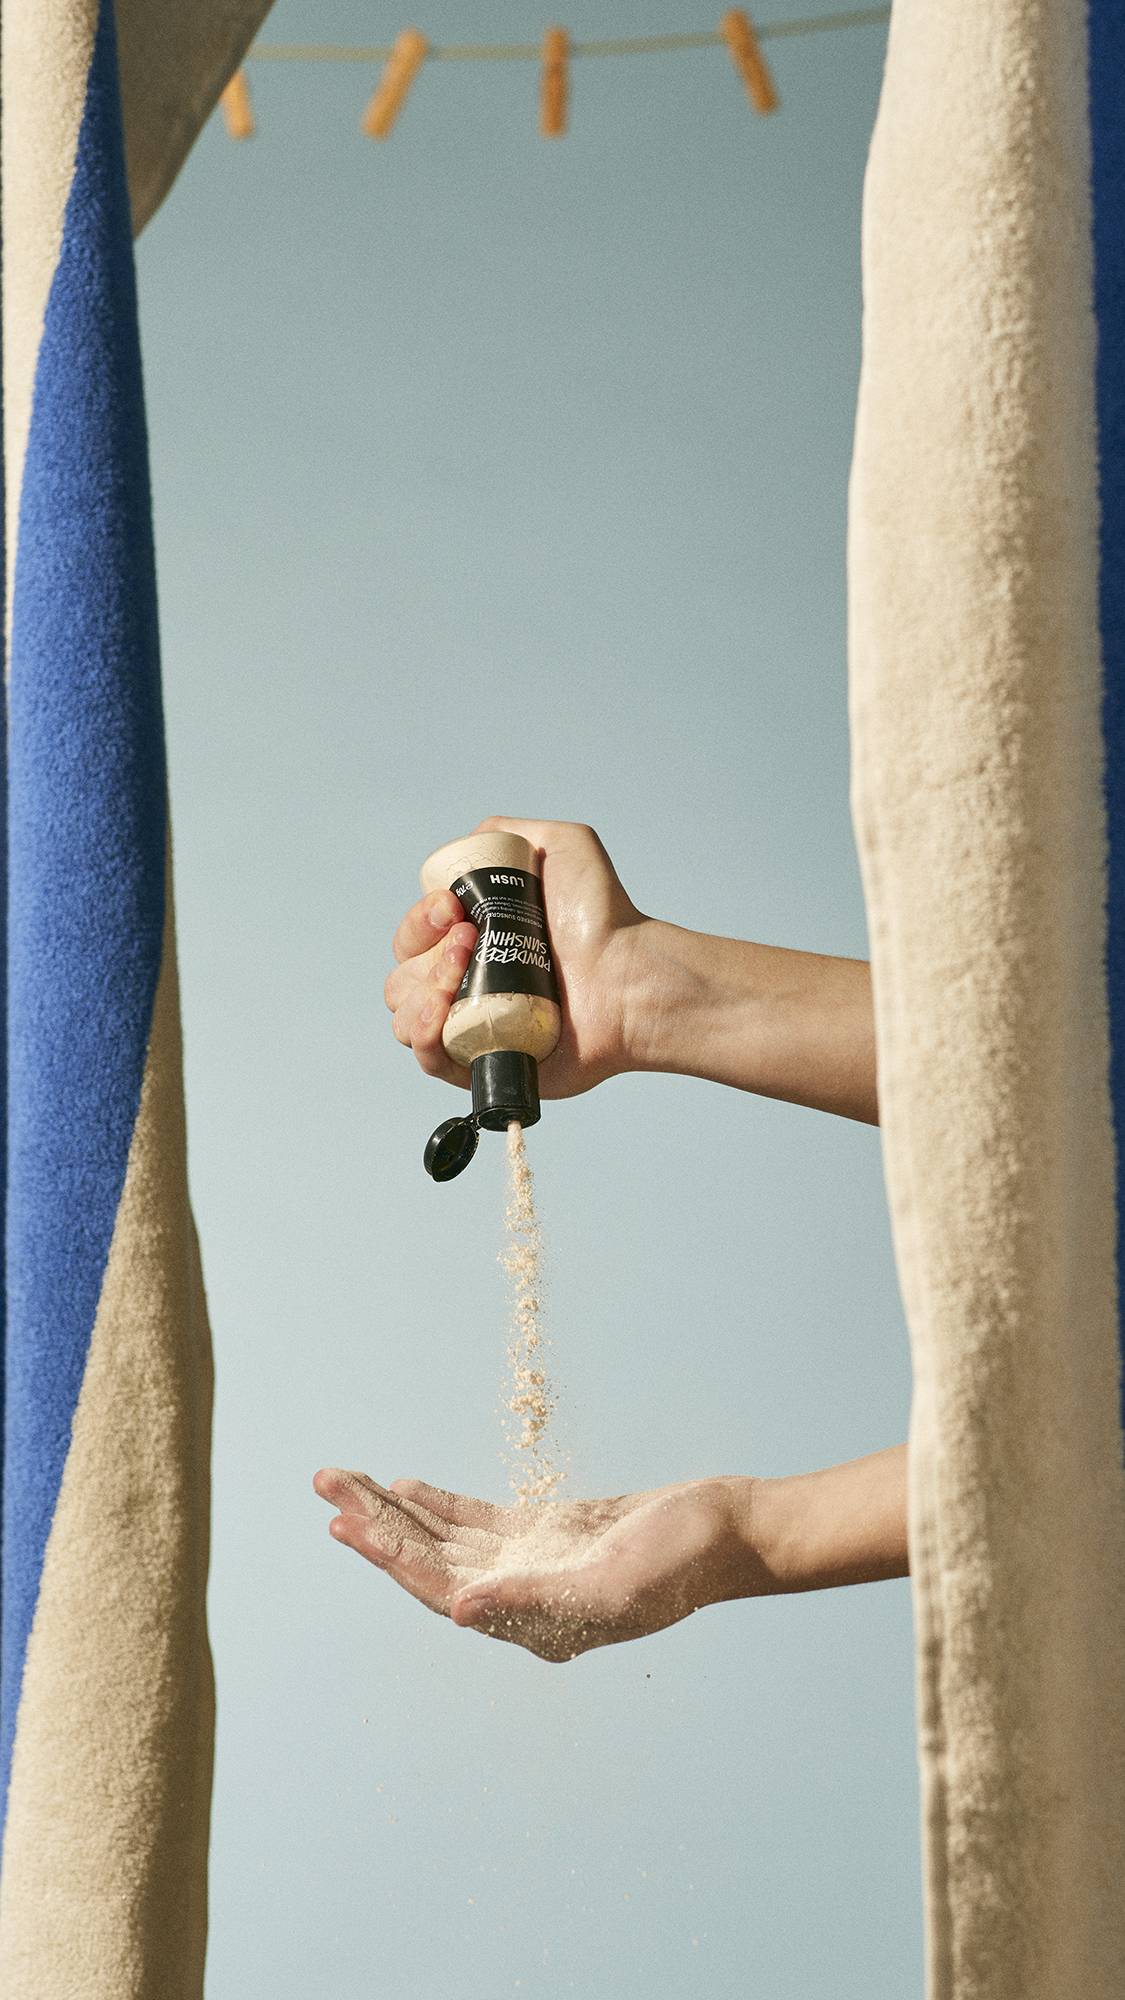 Image shows models hands as they hold the product bottle, squeezing the powder into their other hand below.